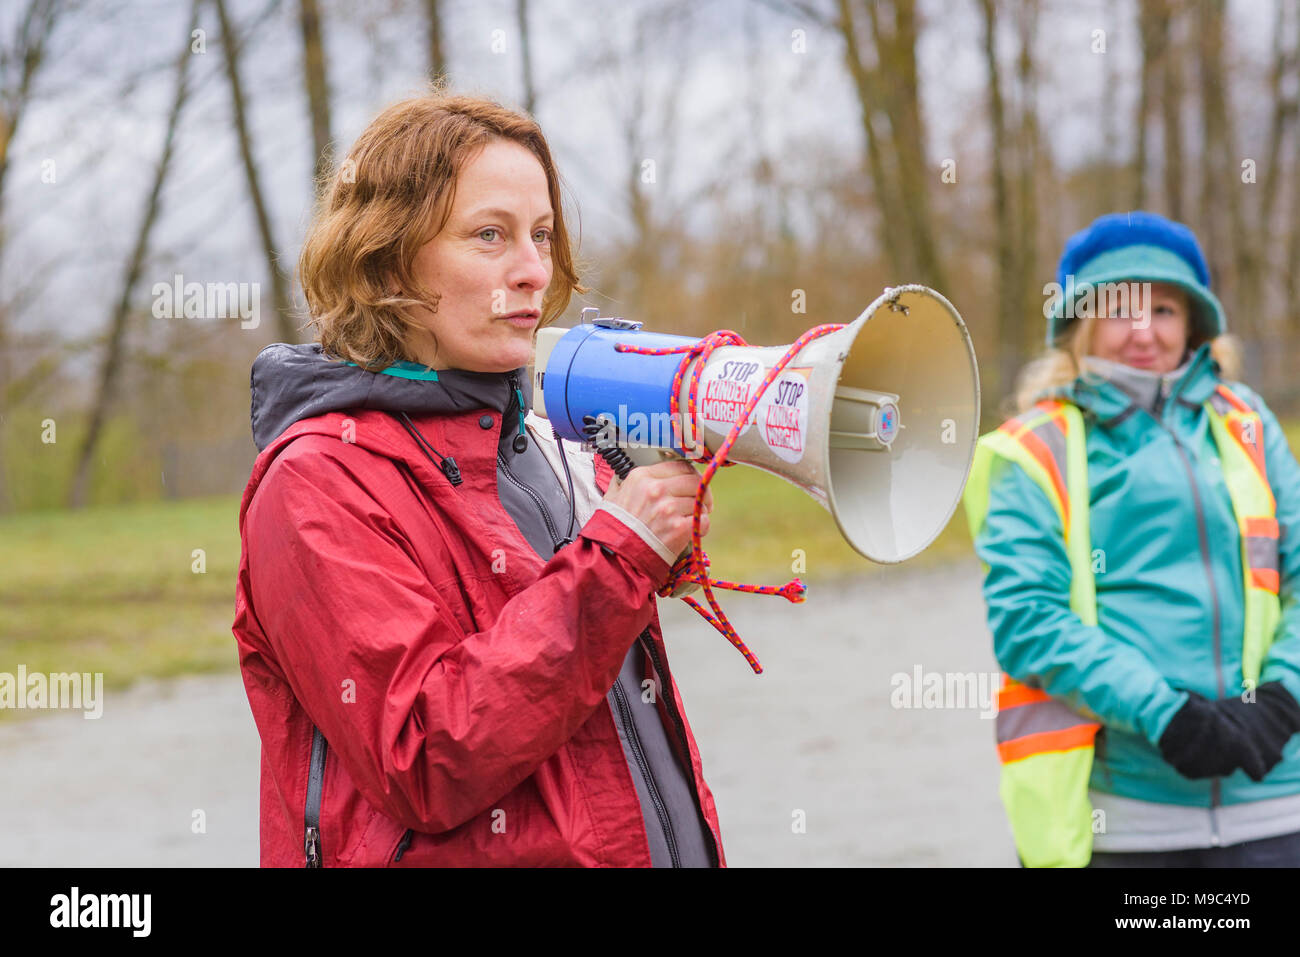 Canadian Singer Songwriter Sarah Harmer speaks to crowd of protesters at Blockade of Kinder Morgan Pipeline entrance, Burnaby, British Columbia, Canada. Credit: Michael Wheatley/Alamy Live News Stock Photo